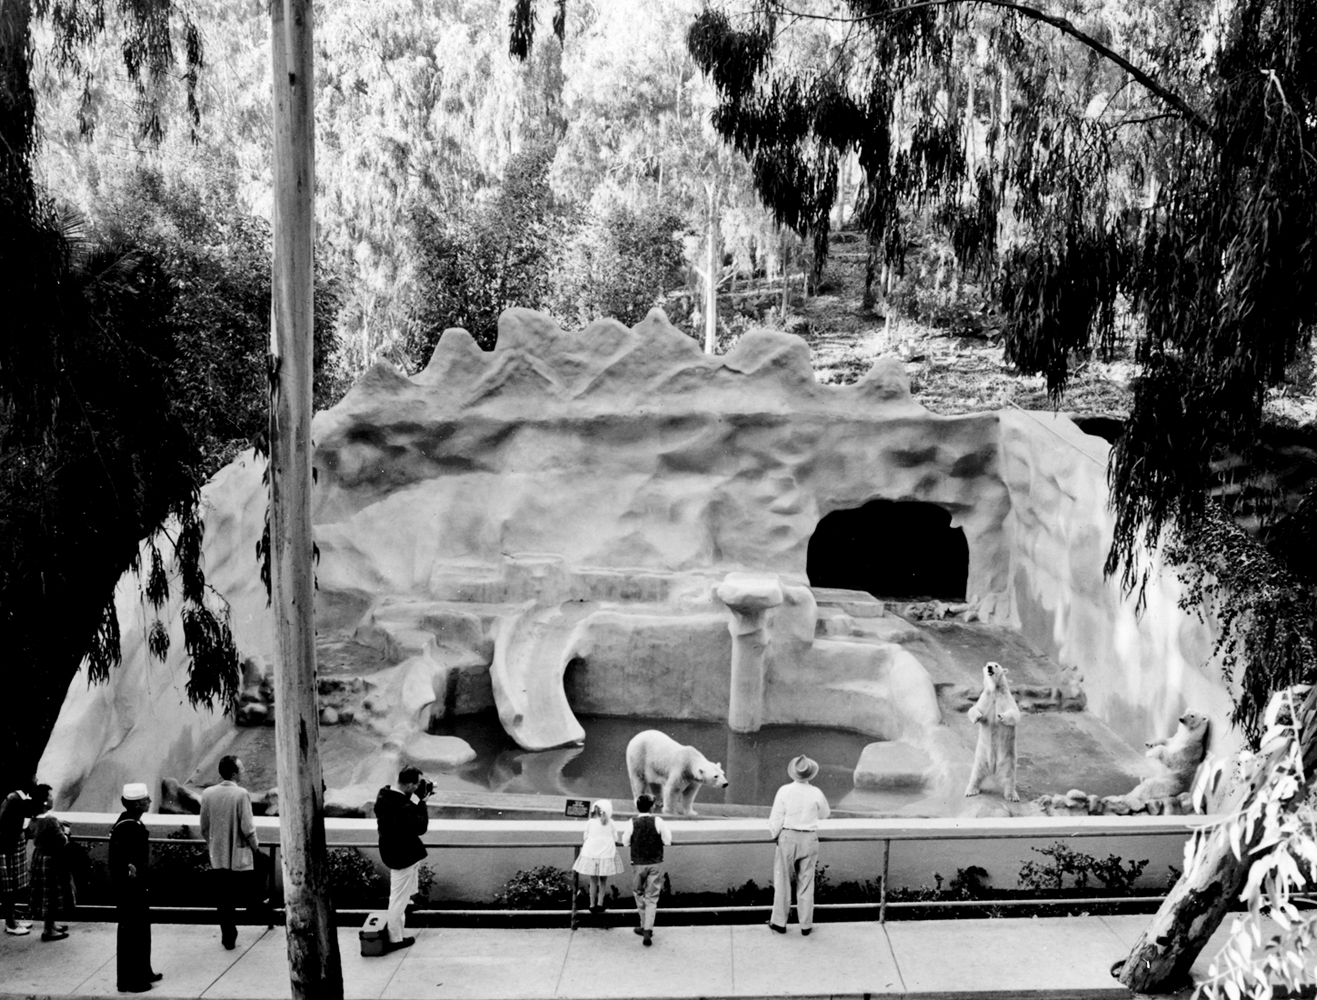 The new polar bear grotto exhibit opened in 1960.